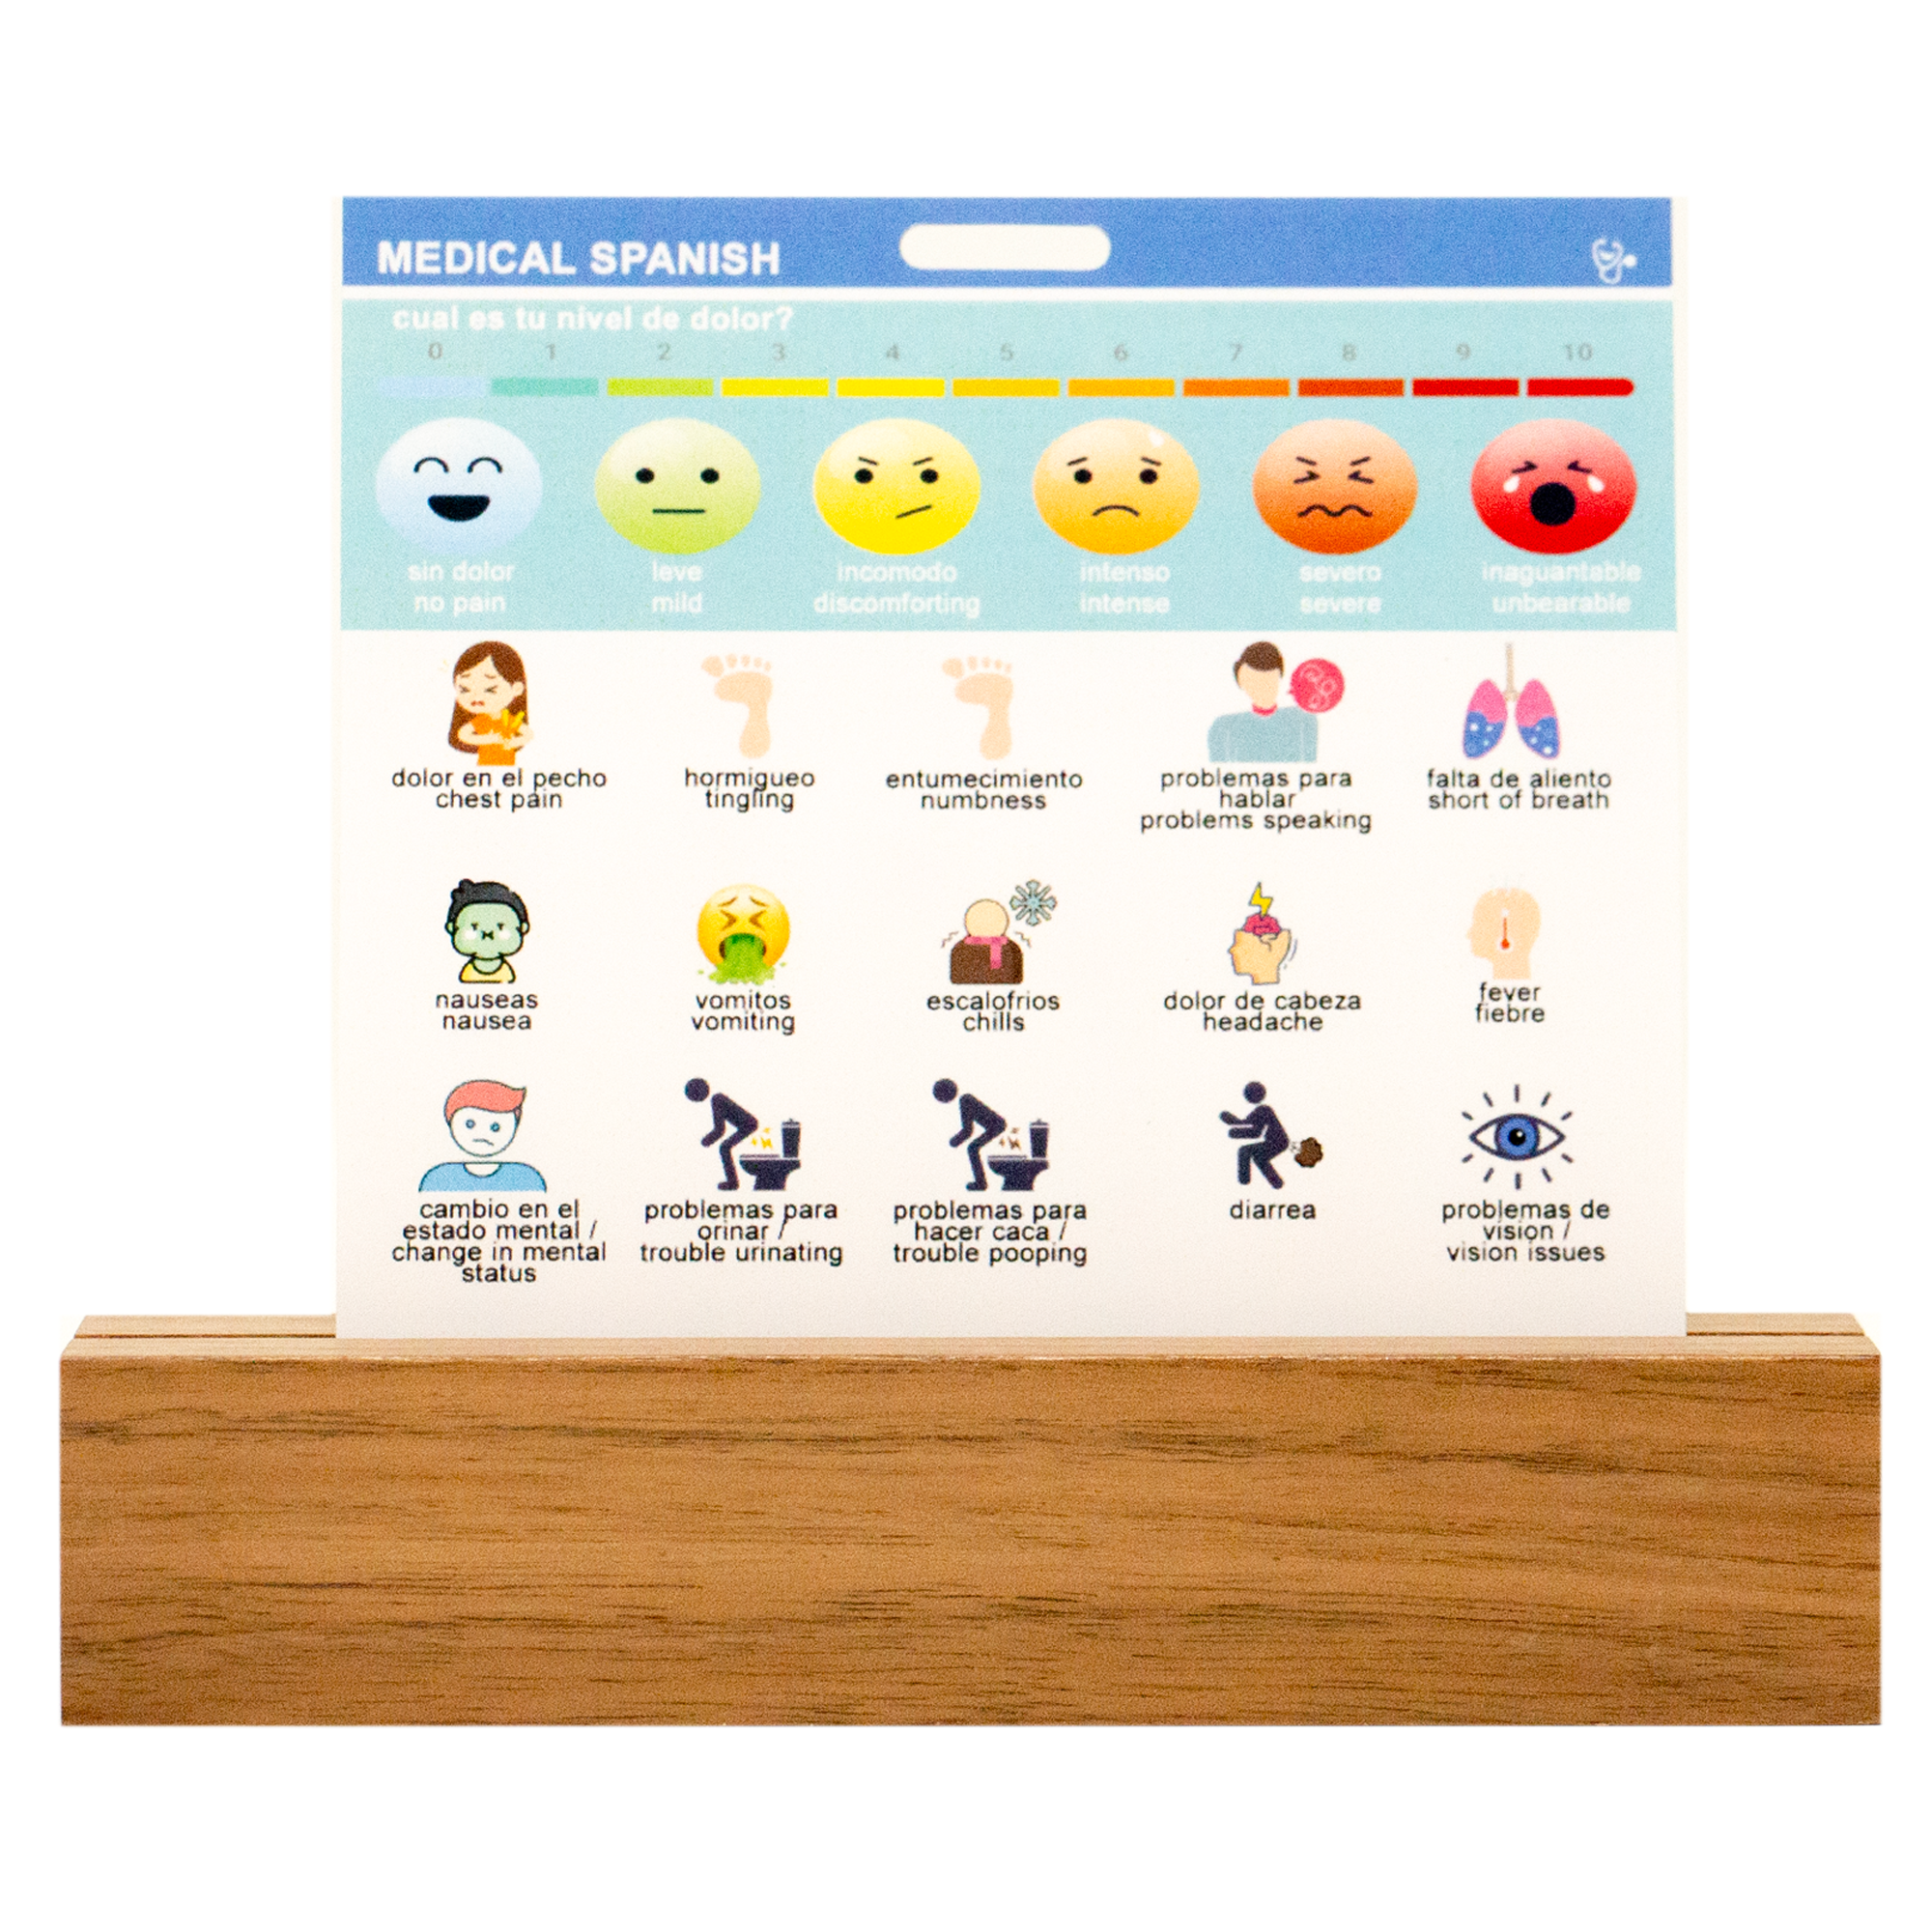 Side 2 of our medical Spanish badge buddy contains a pain scale in English / Spanish as well as presenting symptoms in both English / Spanish